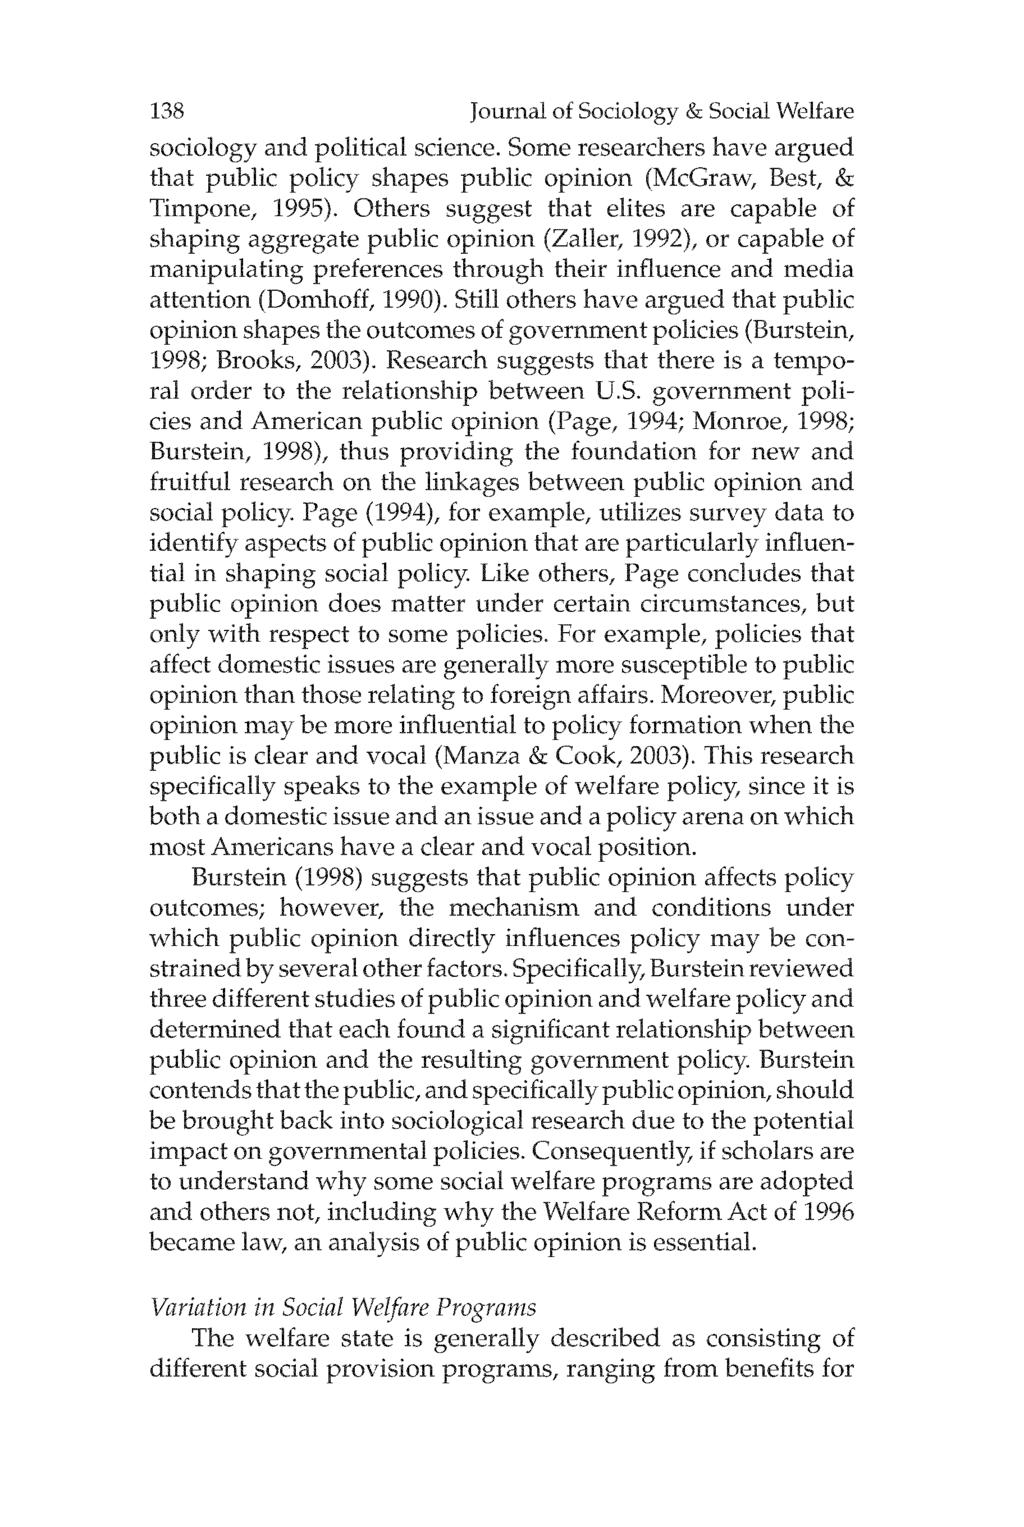 138 Journal of Sociology & Social Welfare sociology and political science. Some researchers have argued that public policy shapes public opinion (McGraw, Best, & Timpone, 1995).